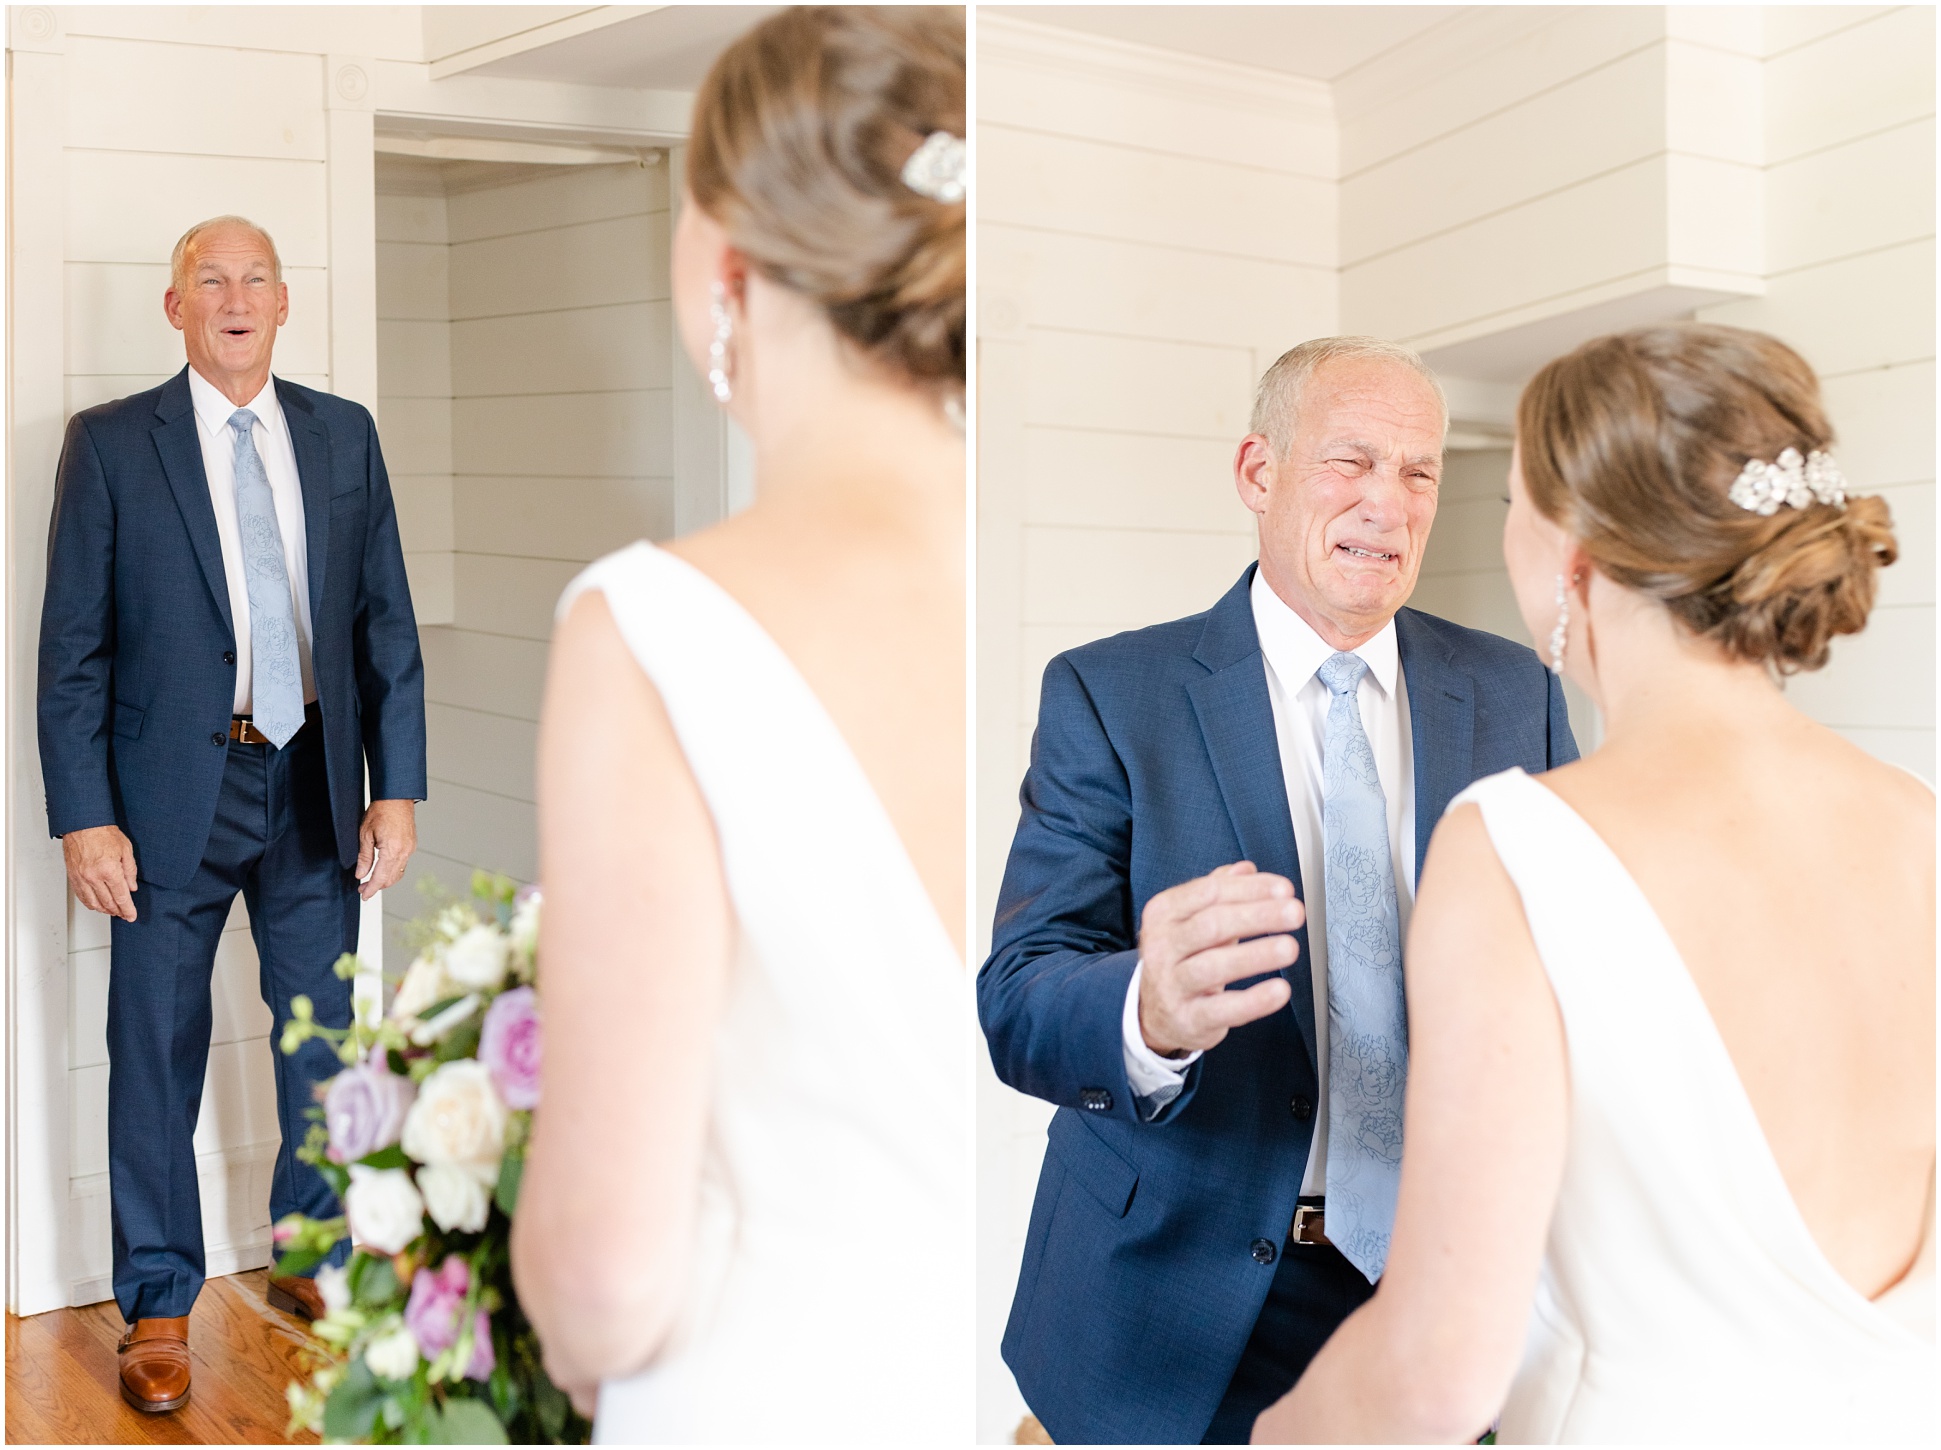 dad's reaction to first look of the bride; Dad crying when looking bride for the first time on wedding day